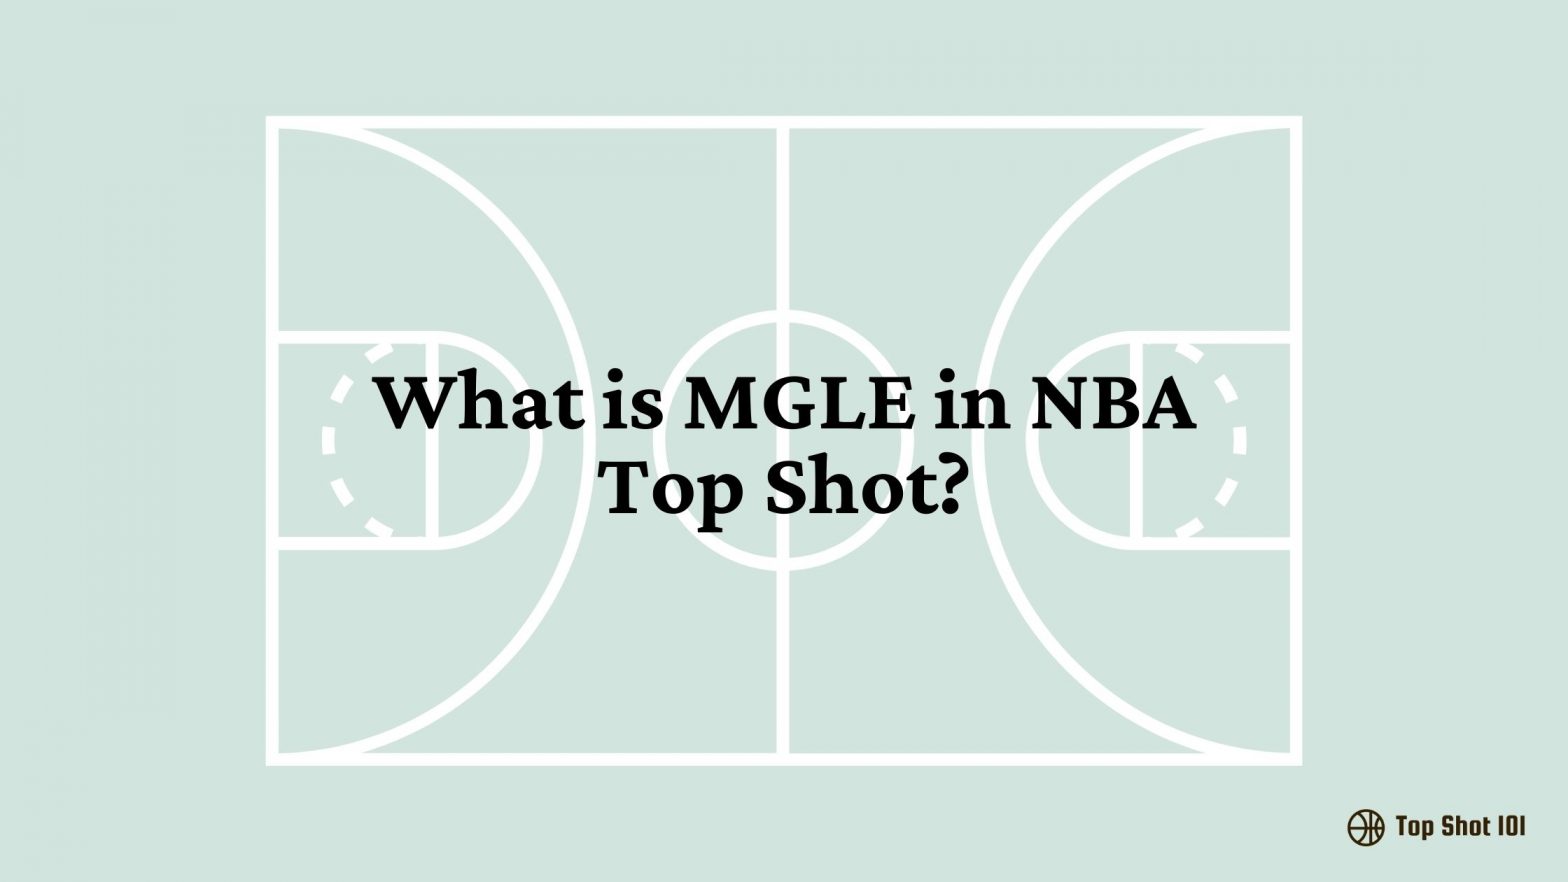 What is MGLE in NBA Top Shot?